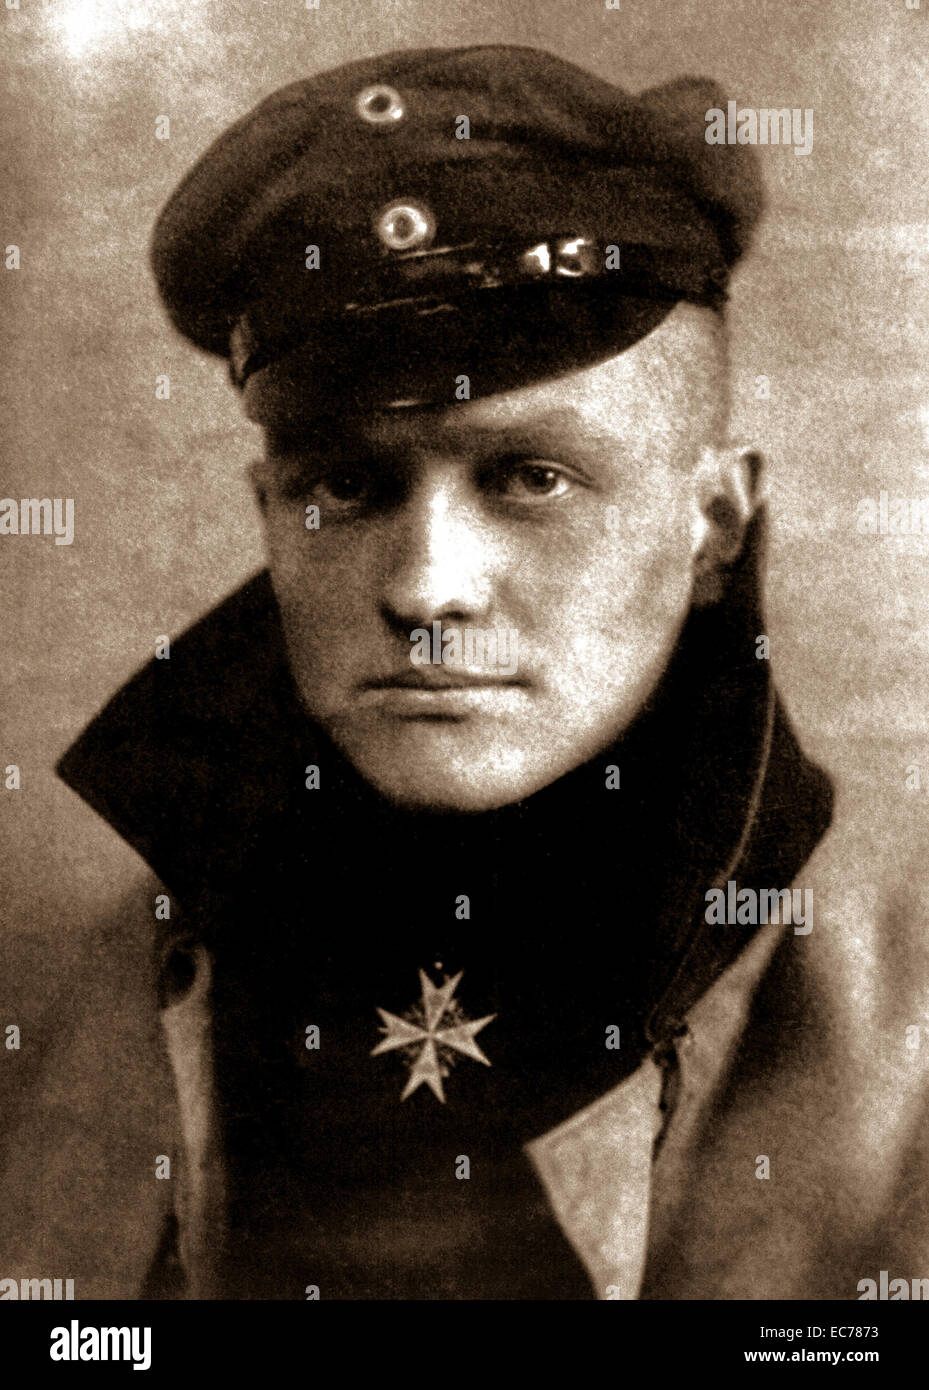 The Red Baron. Freiherr Rittmeister von Richtofen.  Baron Captain Manfred von Richtofen, ca.  1917.  Manfred Albrecht Freiherr von Richthofen (2 May 1892 – 21 April 1918), also widely known as the Red Baron, was a German fighter pilot with the Imperial German Army Air Service (Luftstreitkräfte) during World War I. He is considered the top ace of the war, being officially credited with 80 air combat victories. Stock Photo